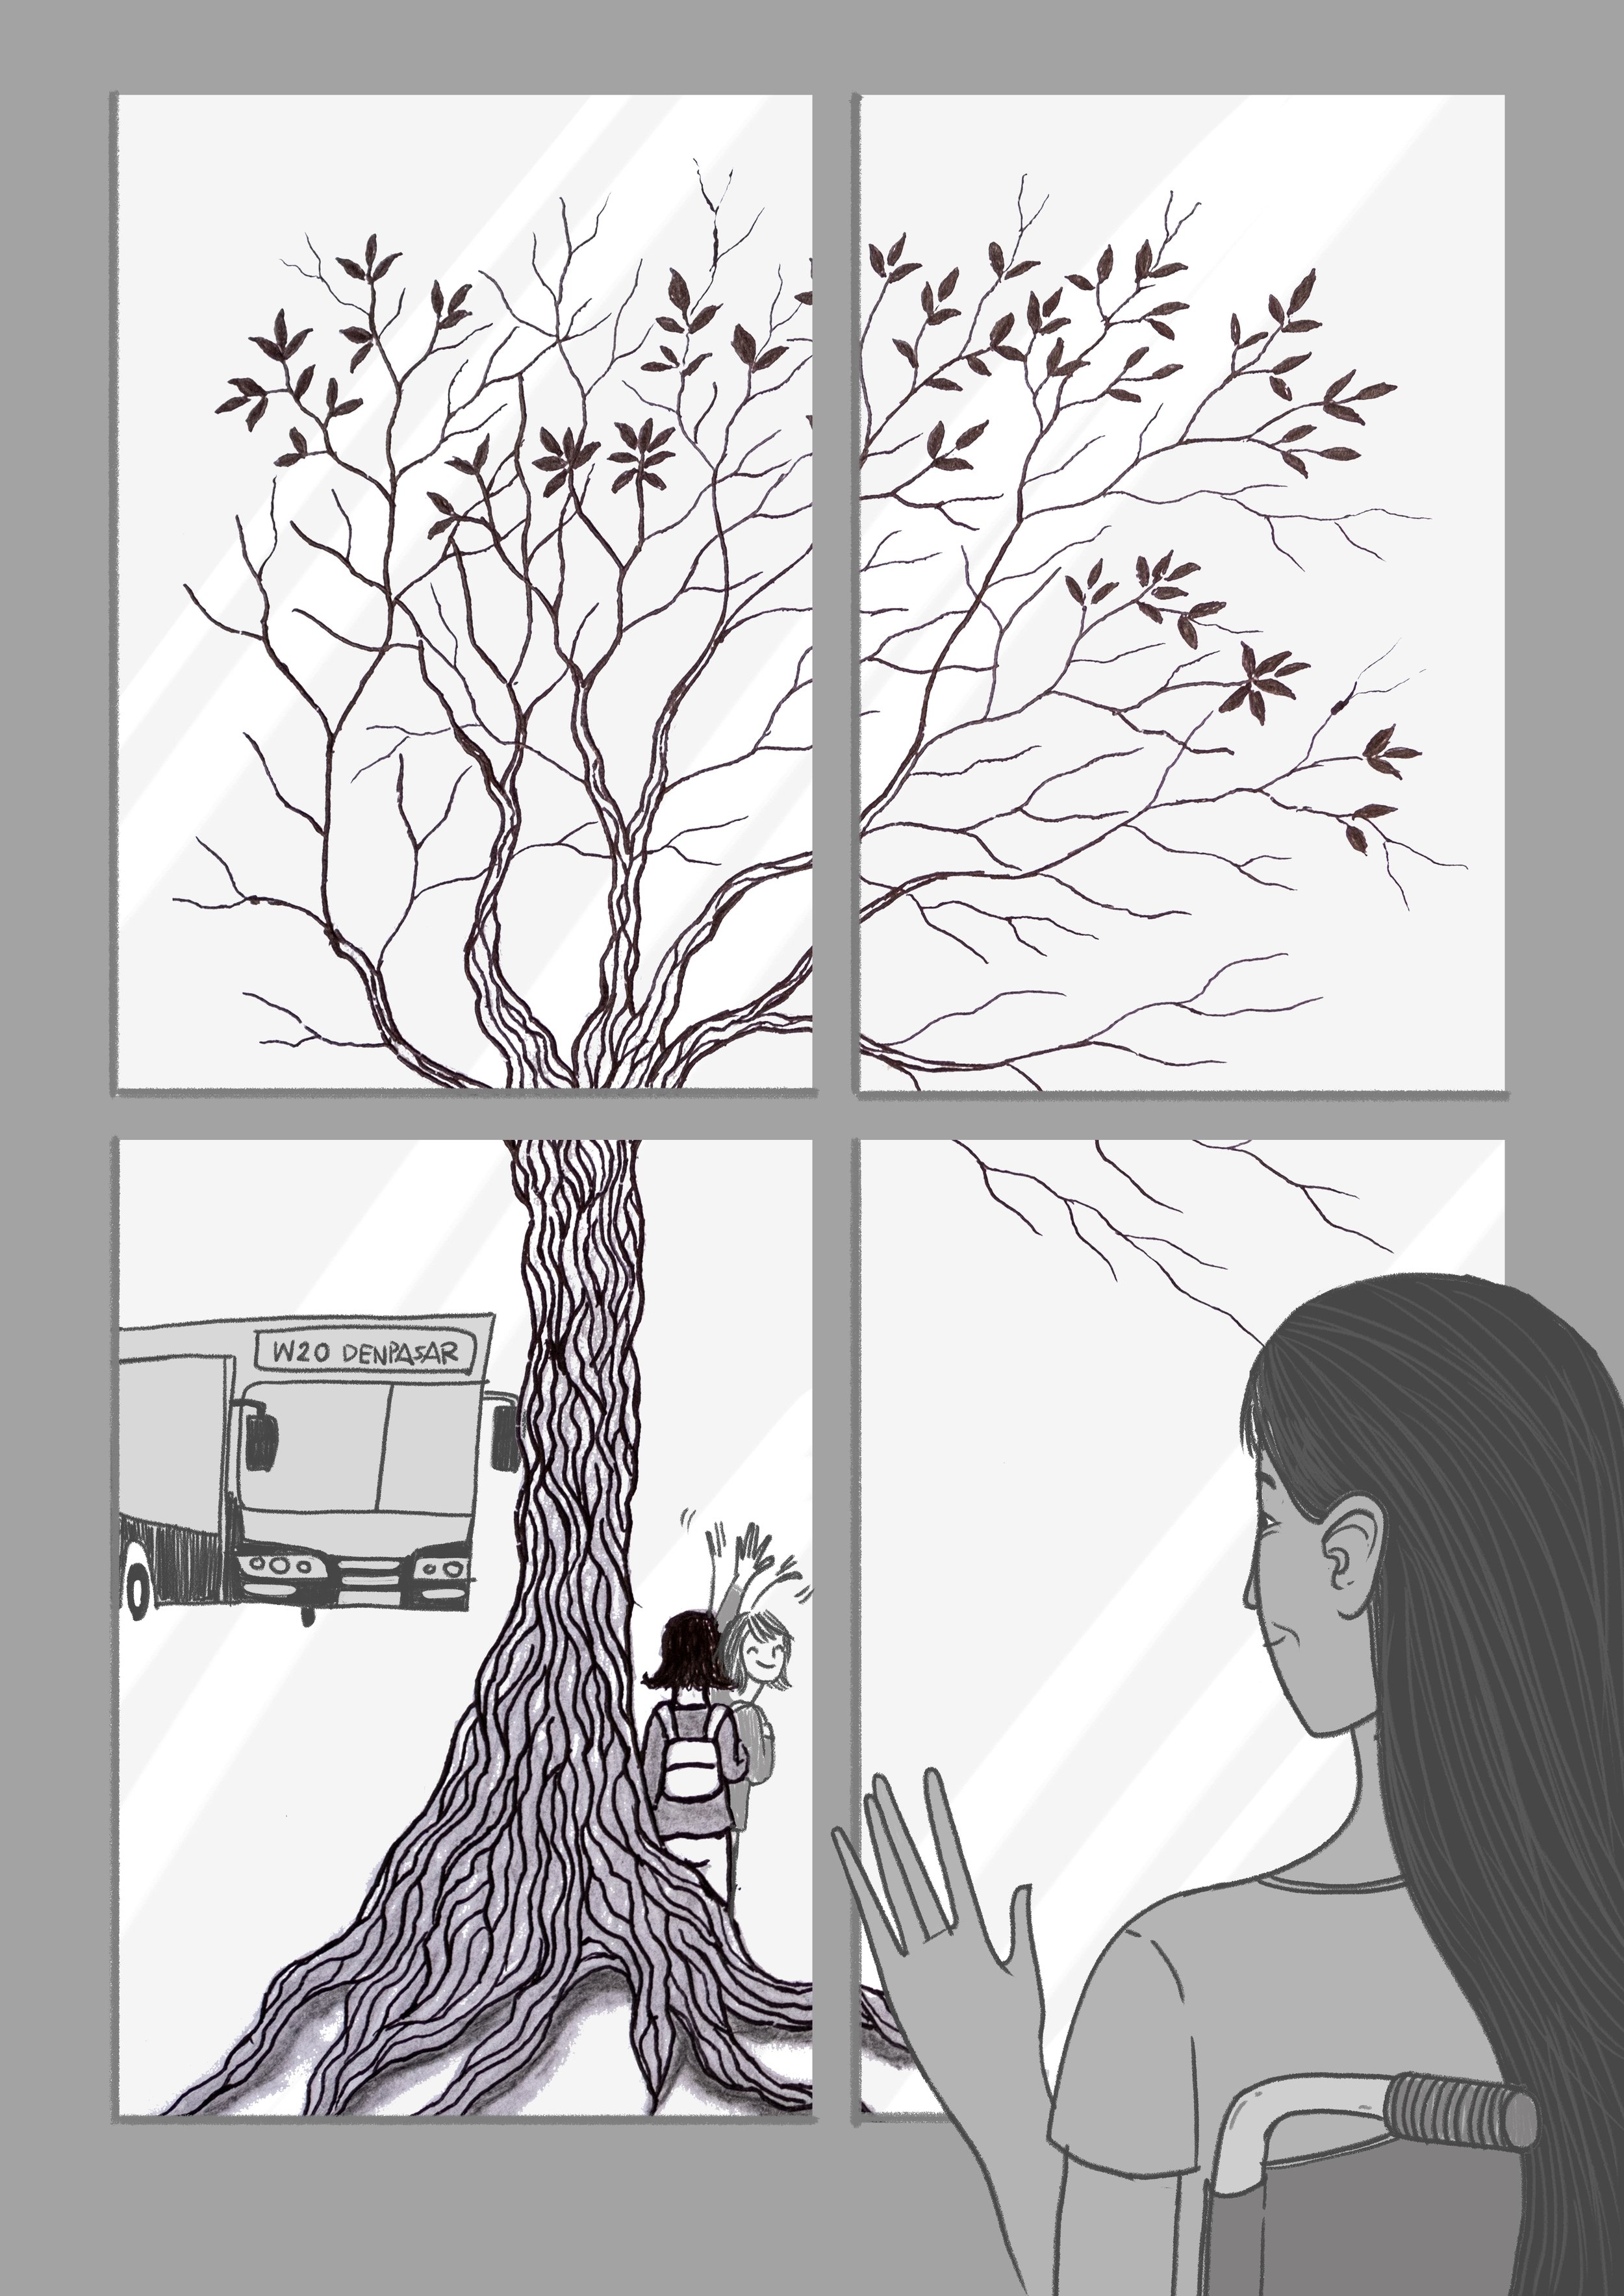 Window, Ink drawing and digital illustration combined14.8x21cm